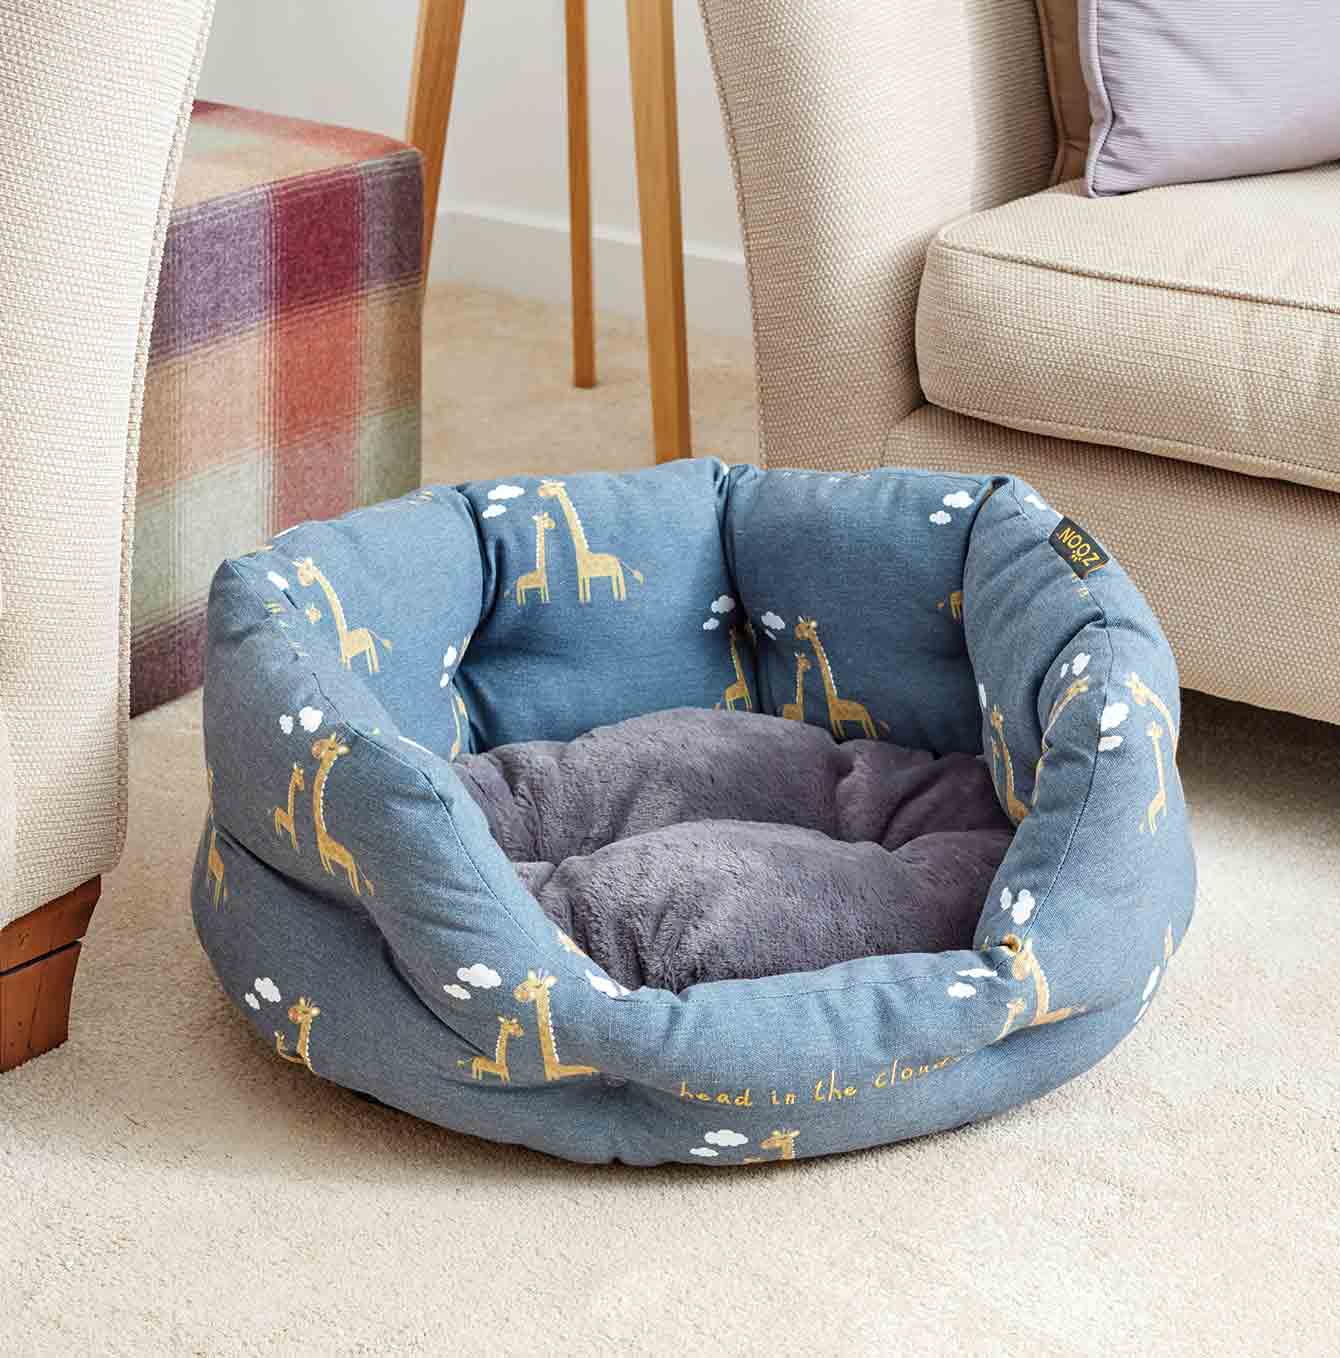 Zoon head in the clouds oval bed between to sofas